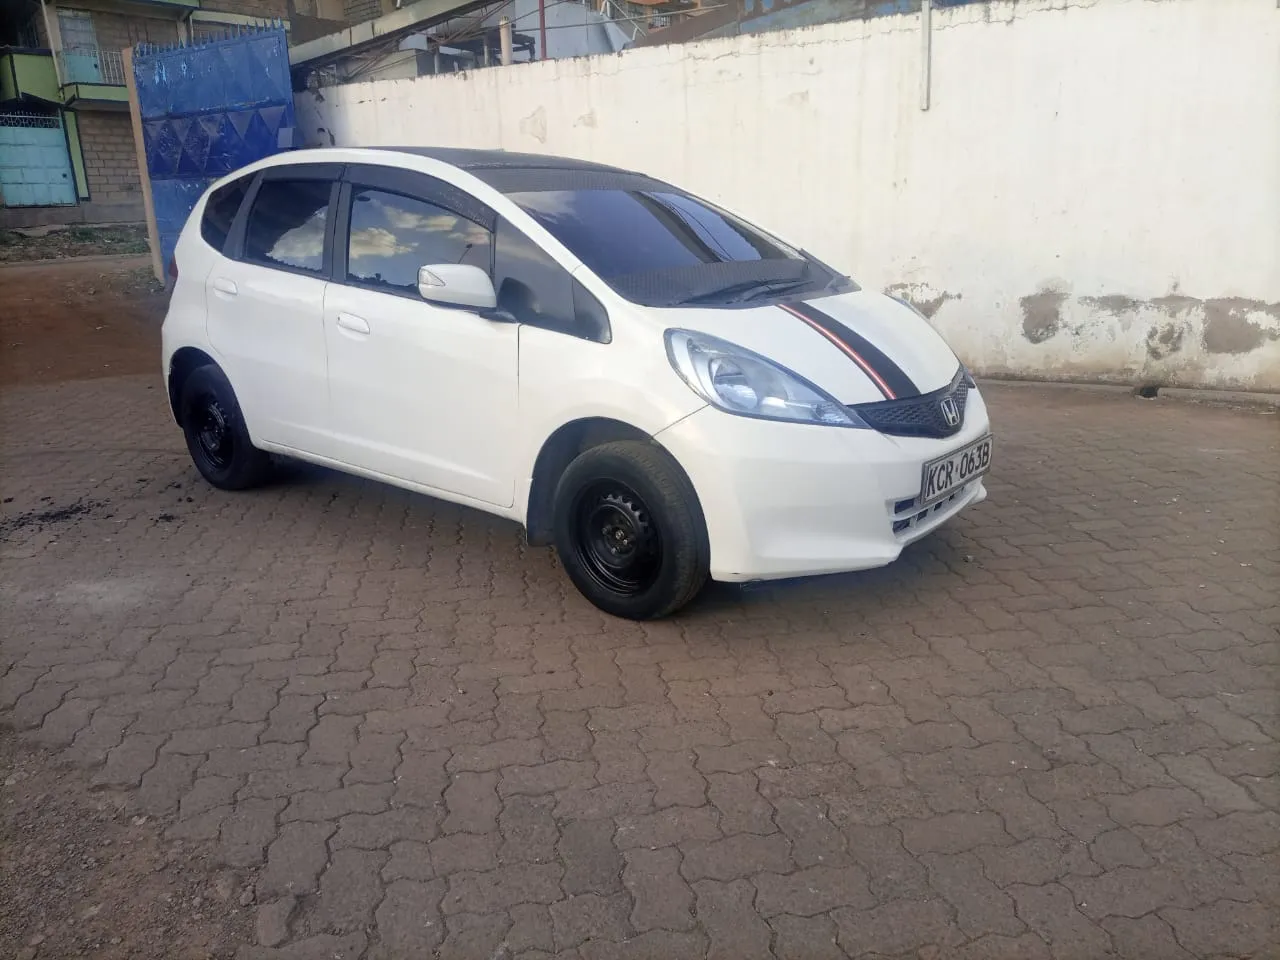 Honda Fit 2011 450k ONLY You Pay 30% DEPOSIT TRADE IN OK